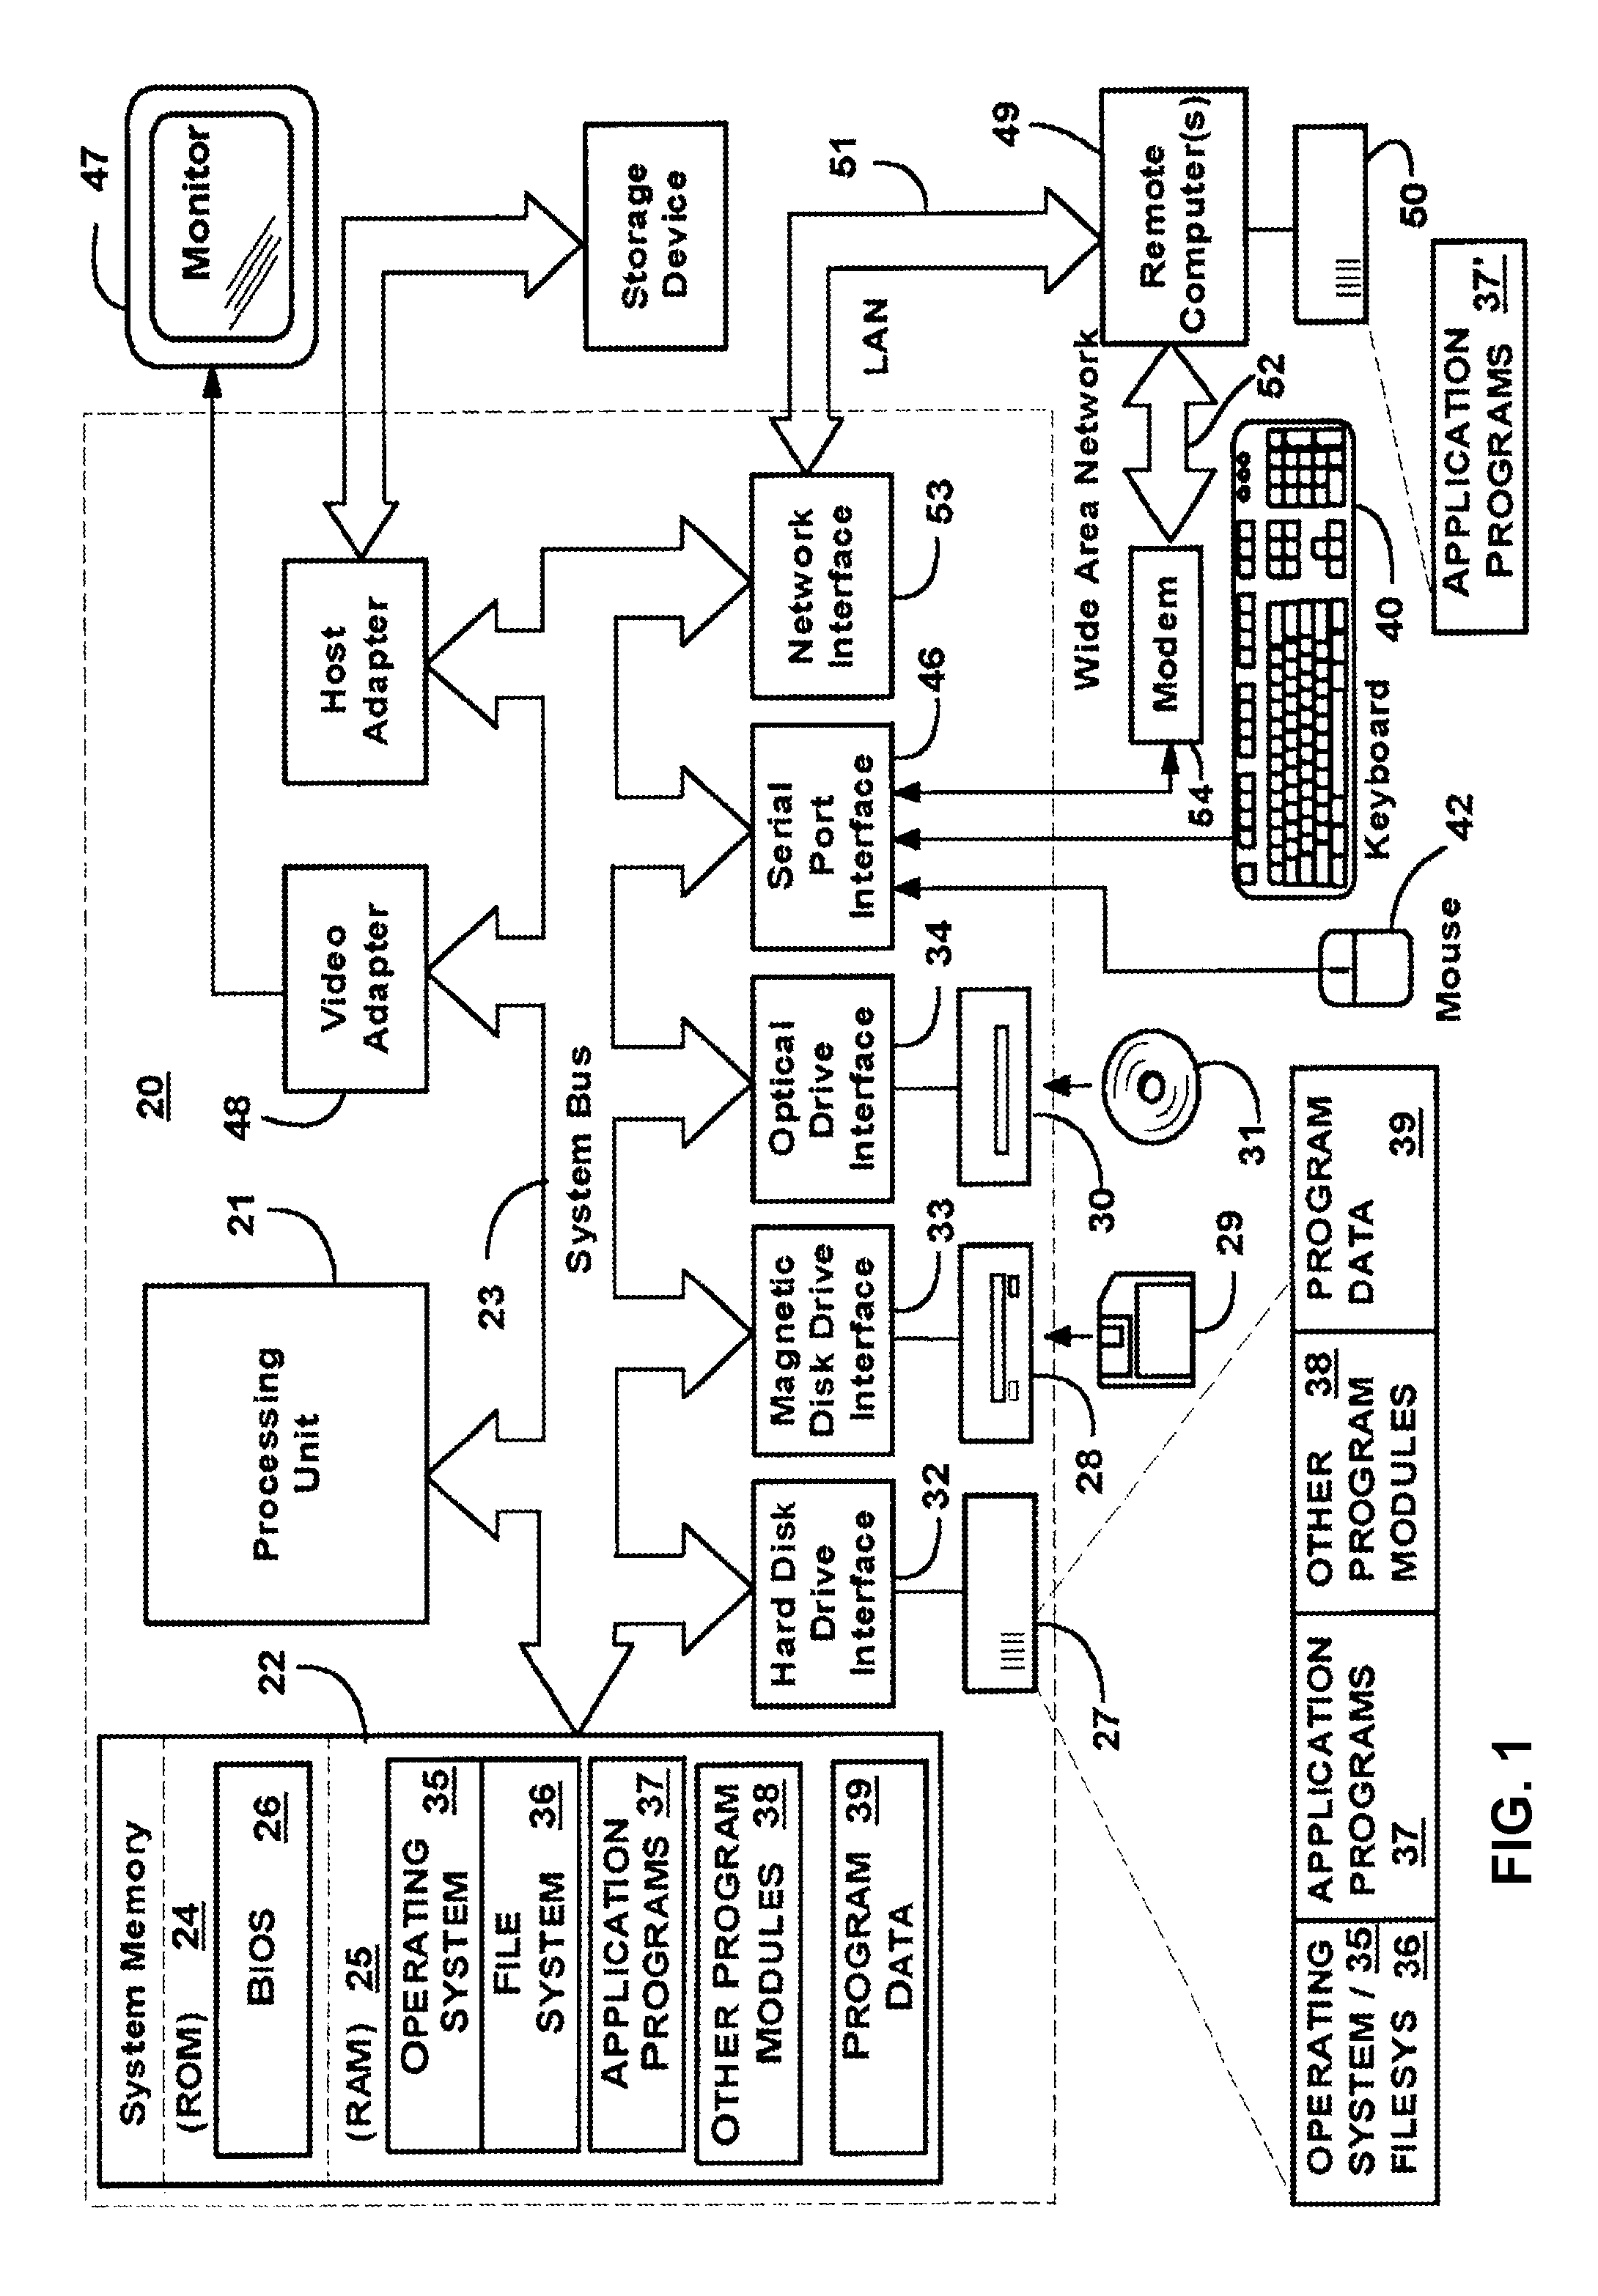 Method for protecting data used in cloud computing with homomorphic encryption